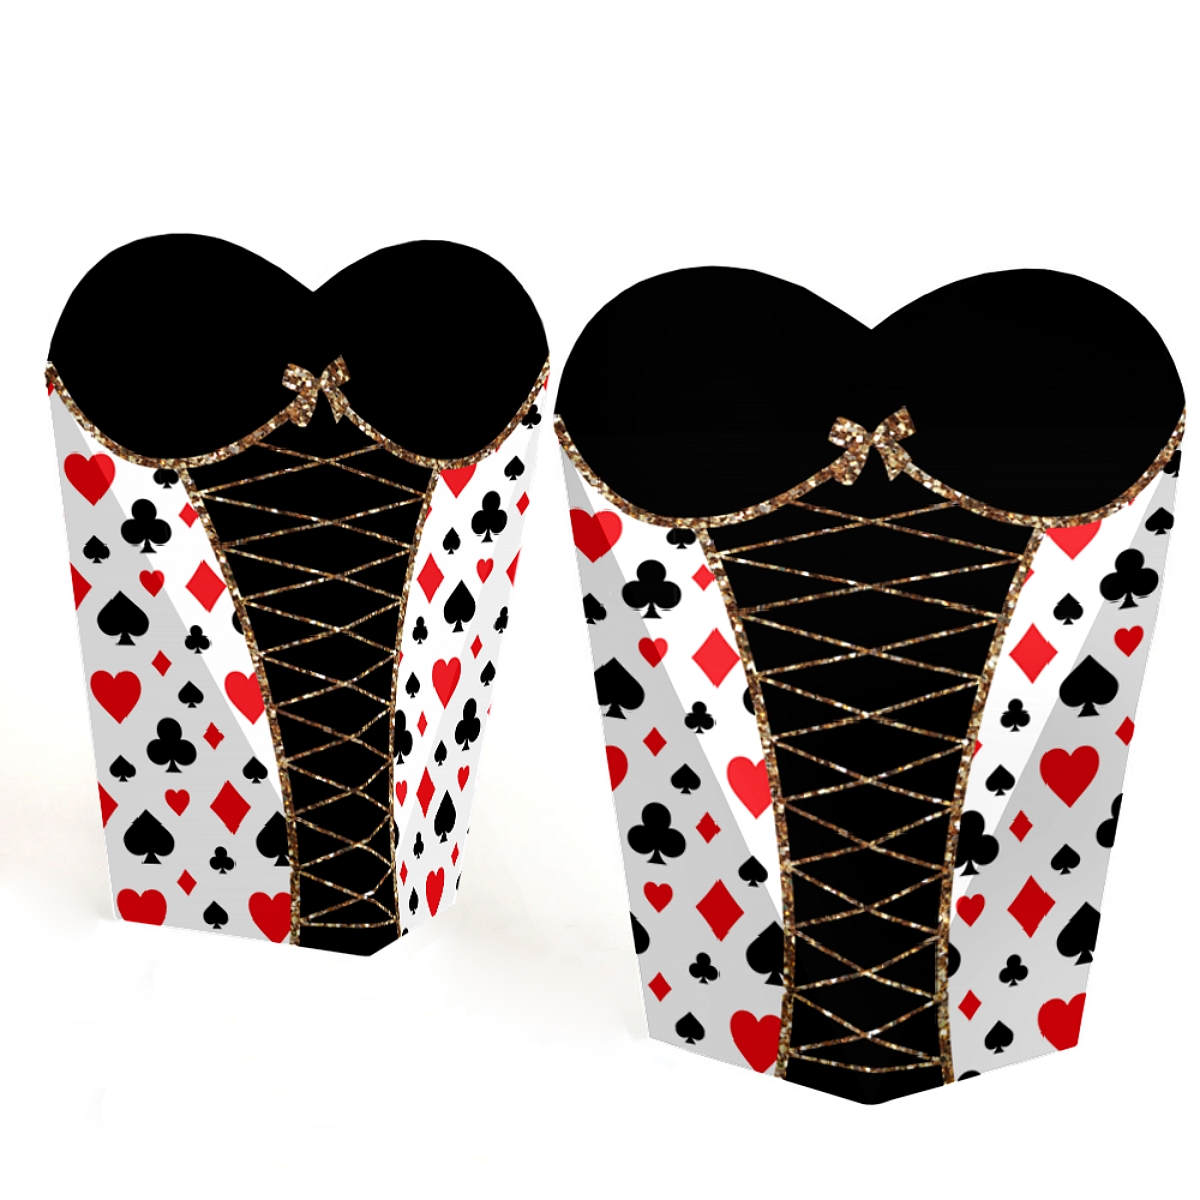 Big Dot of Happiness Las Vegas - Casino Party Favors - Gift Heart Shaped Favor Boxes for Women - Set of 12 - image 2 of 6